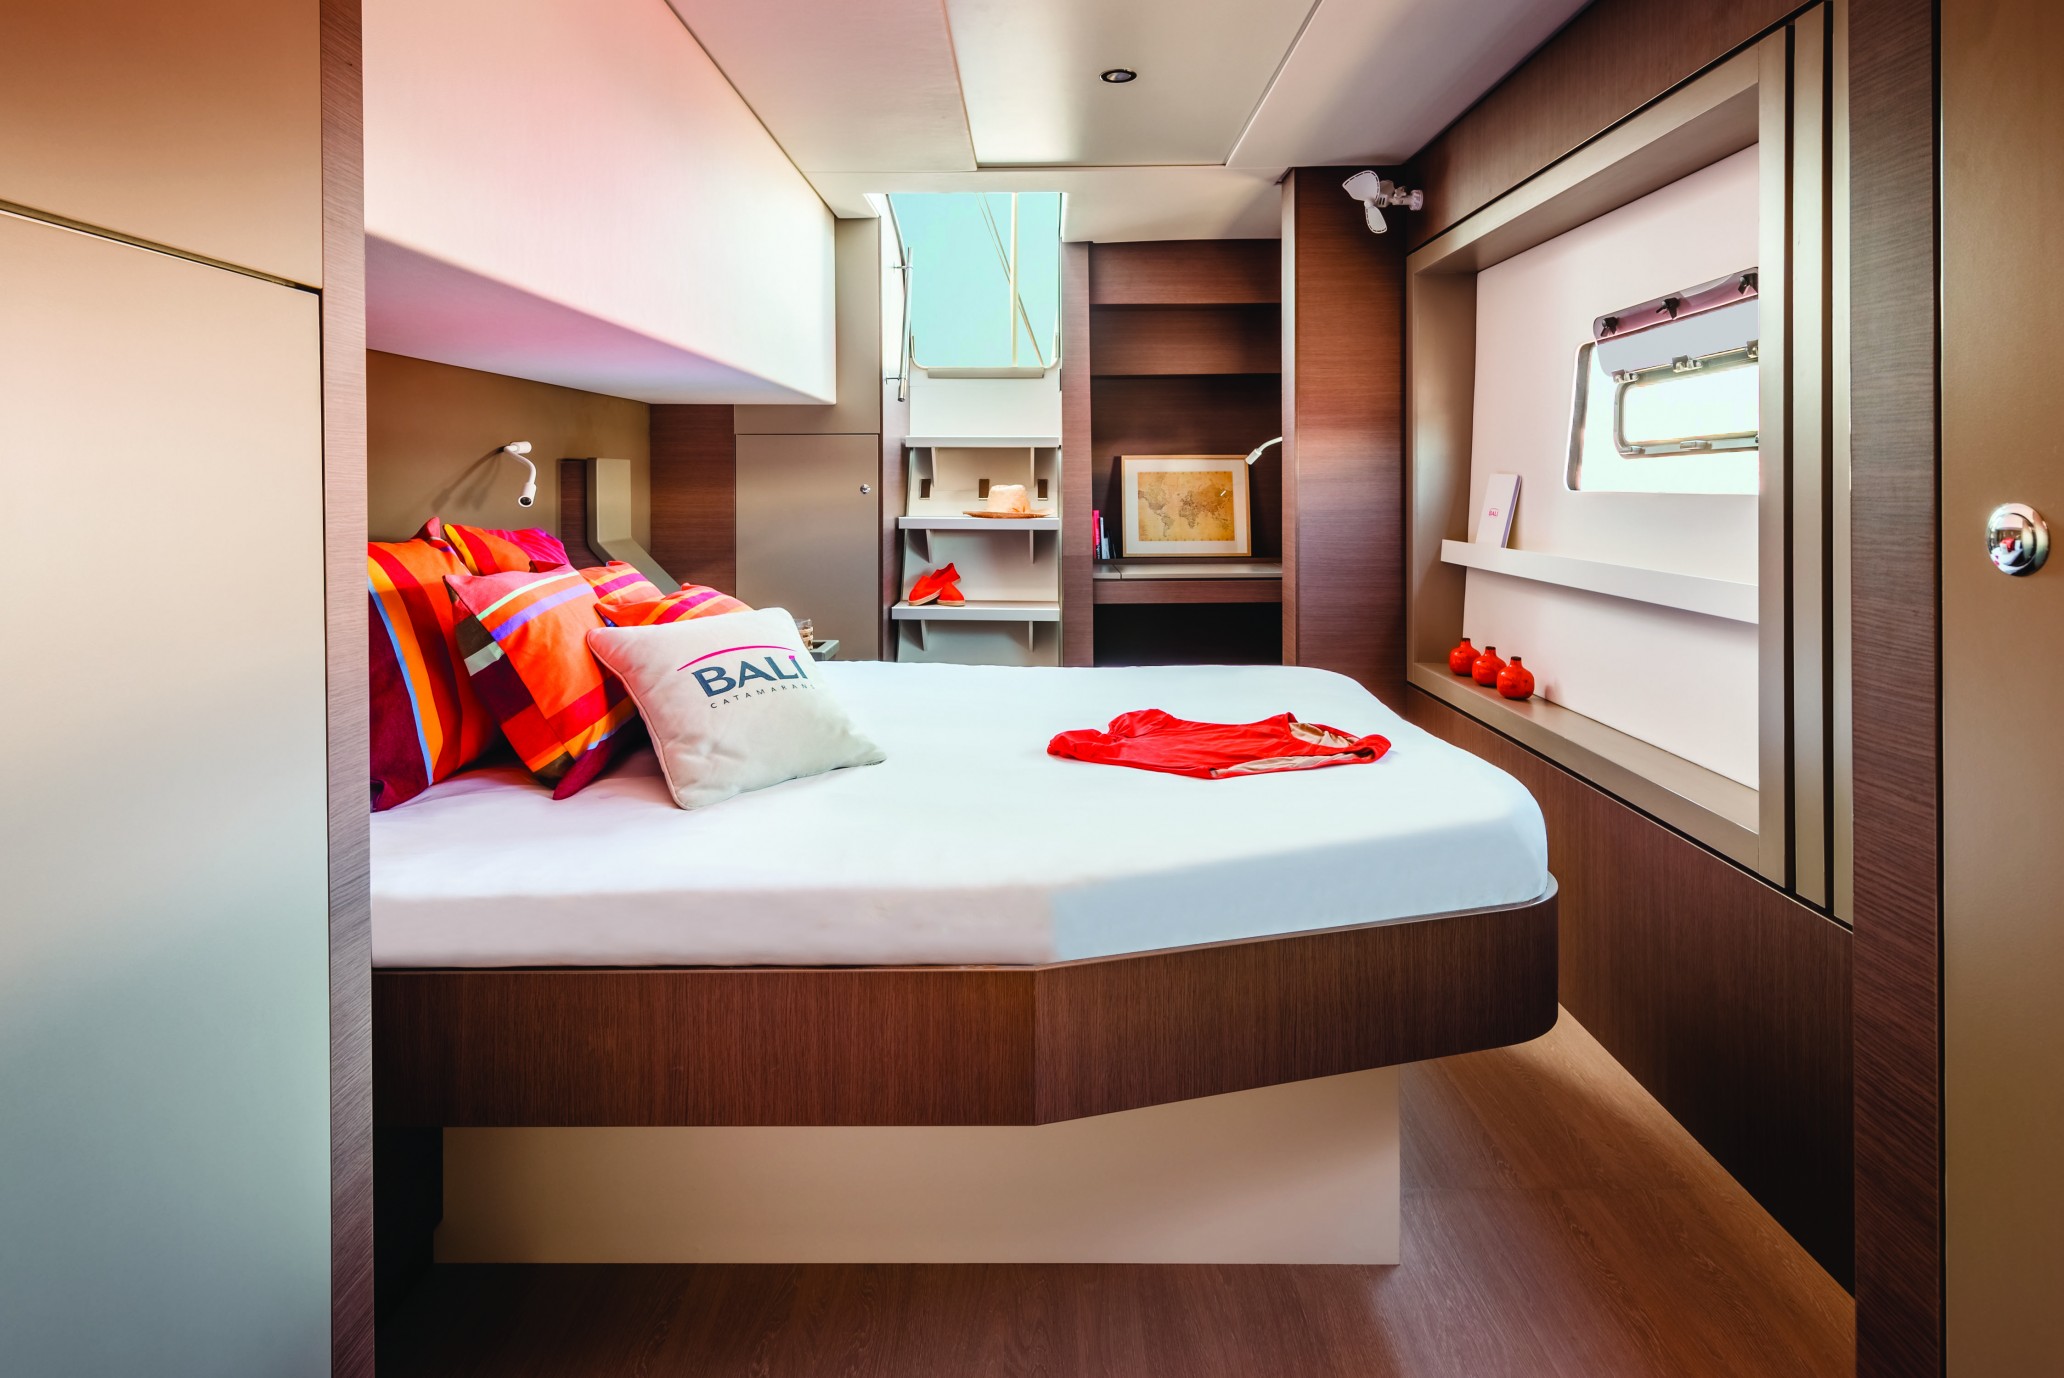 Example of Bali 4.8 cabin